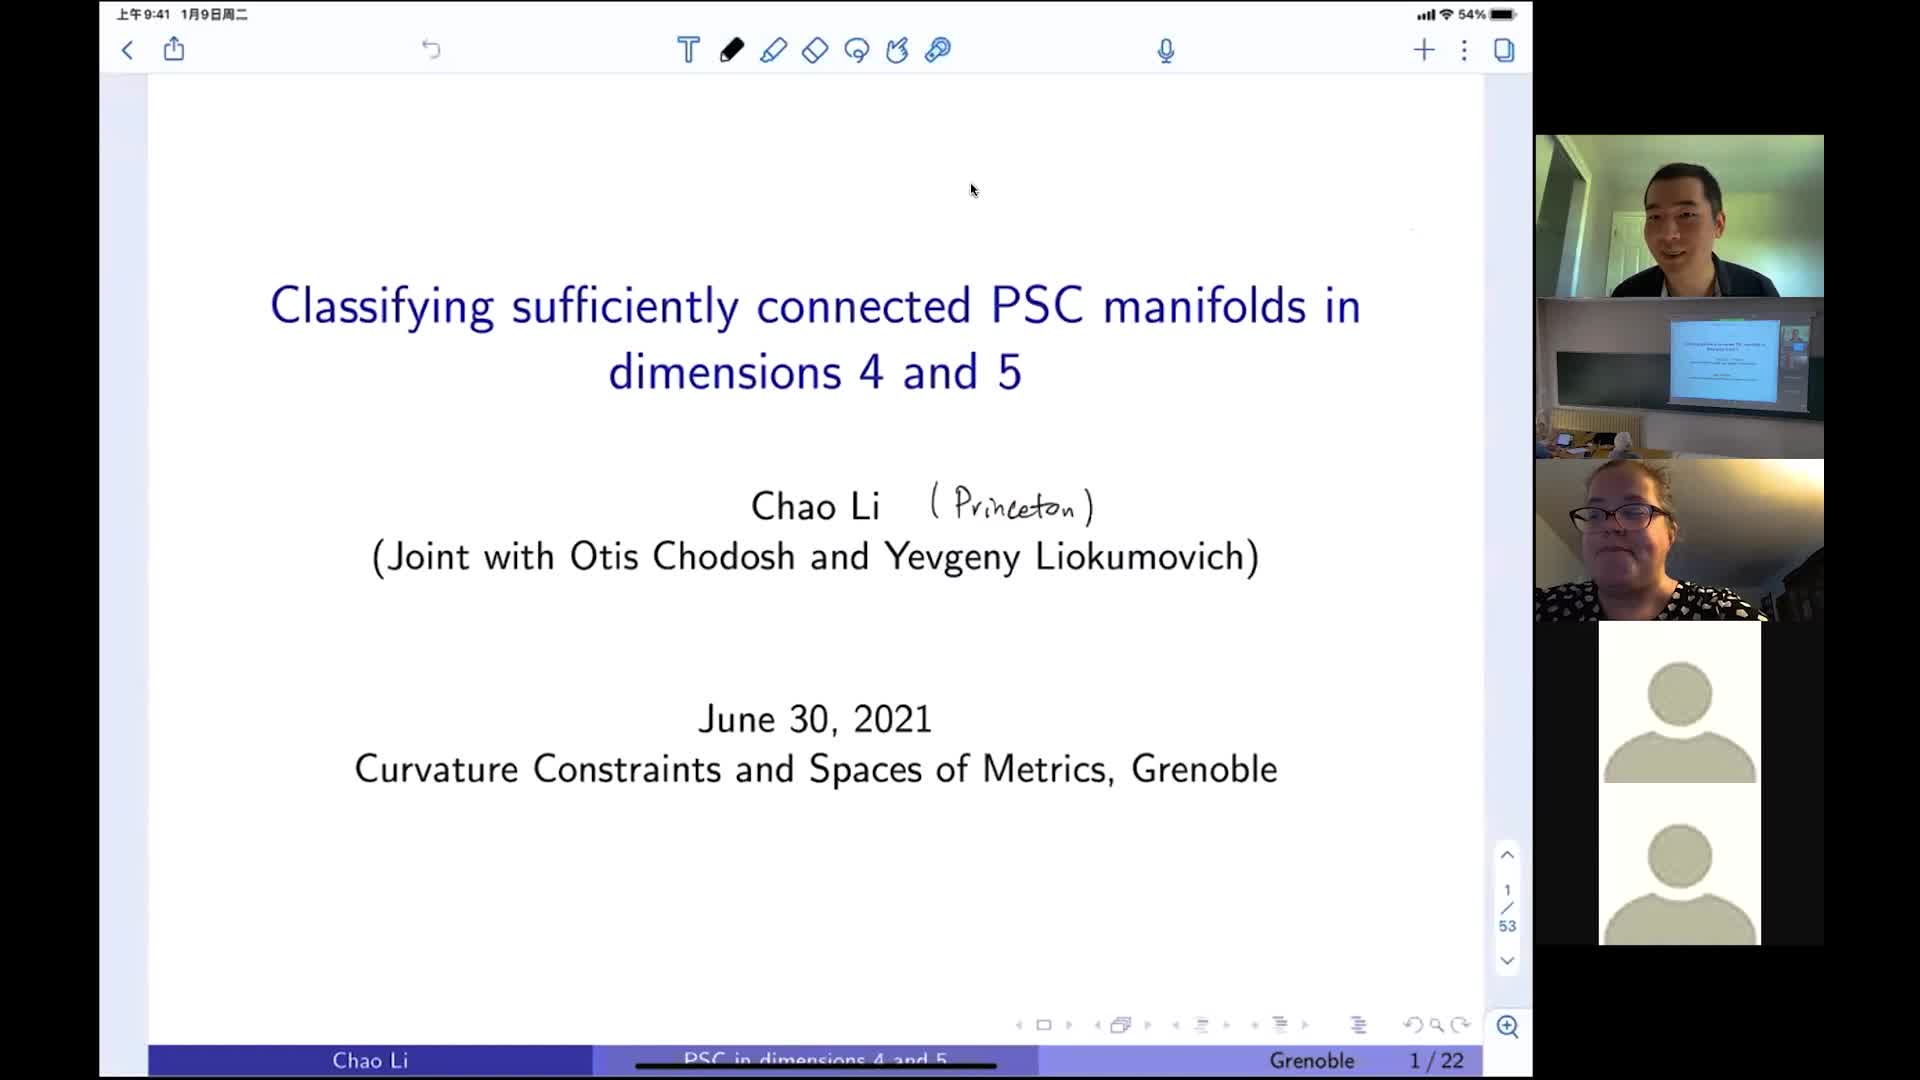 C. Li - Classifying sufficiently connected PSC manifolds in 4 and 5 dimensions